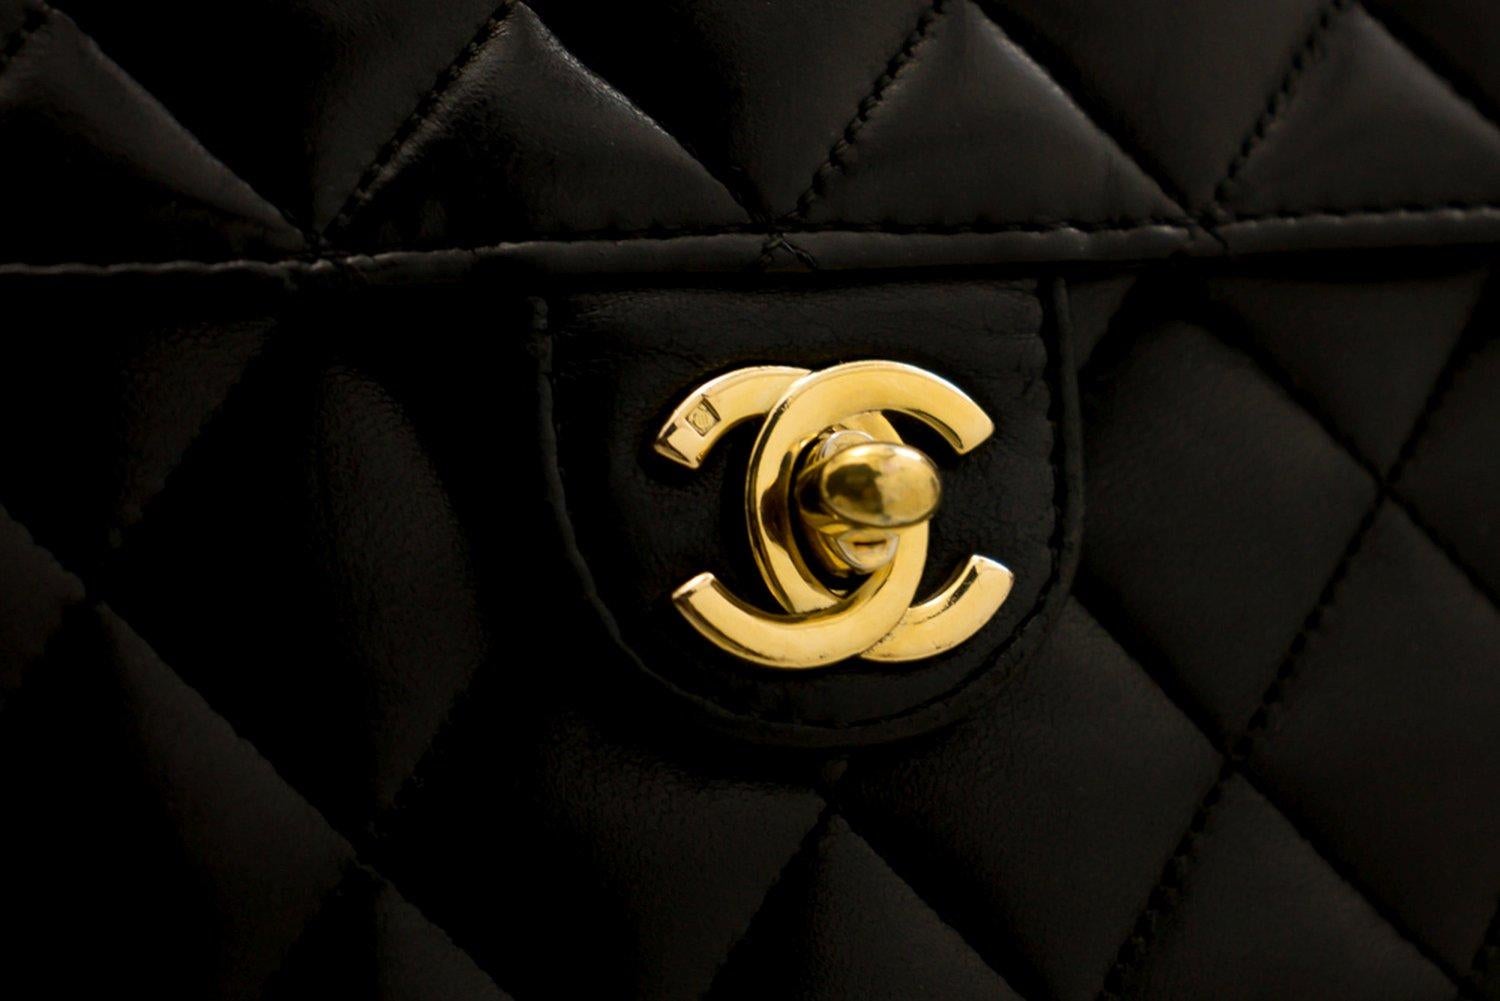 CHANEL Small Chain Shoulder Bag Black Clutch Flap Quilted Lambskin 5